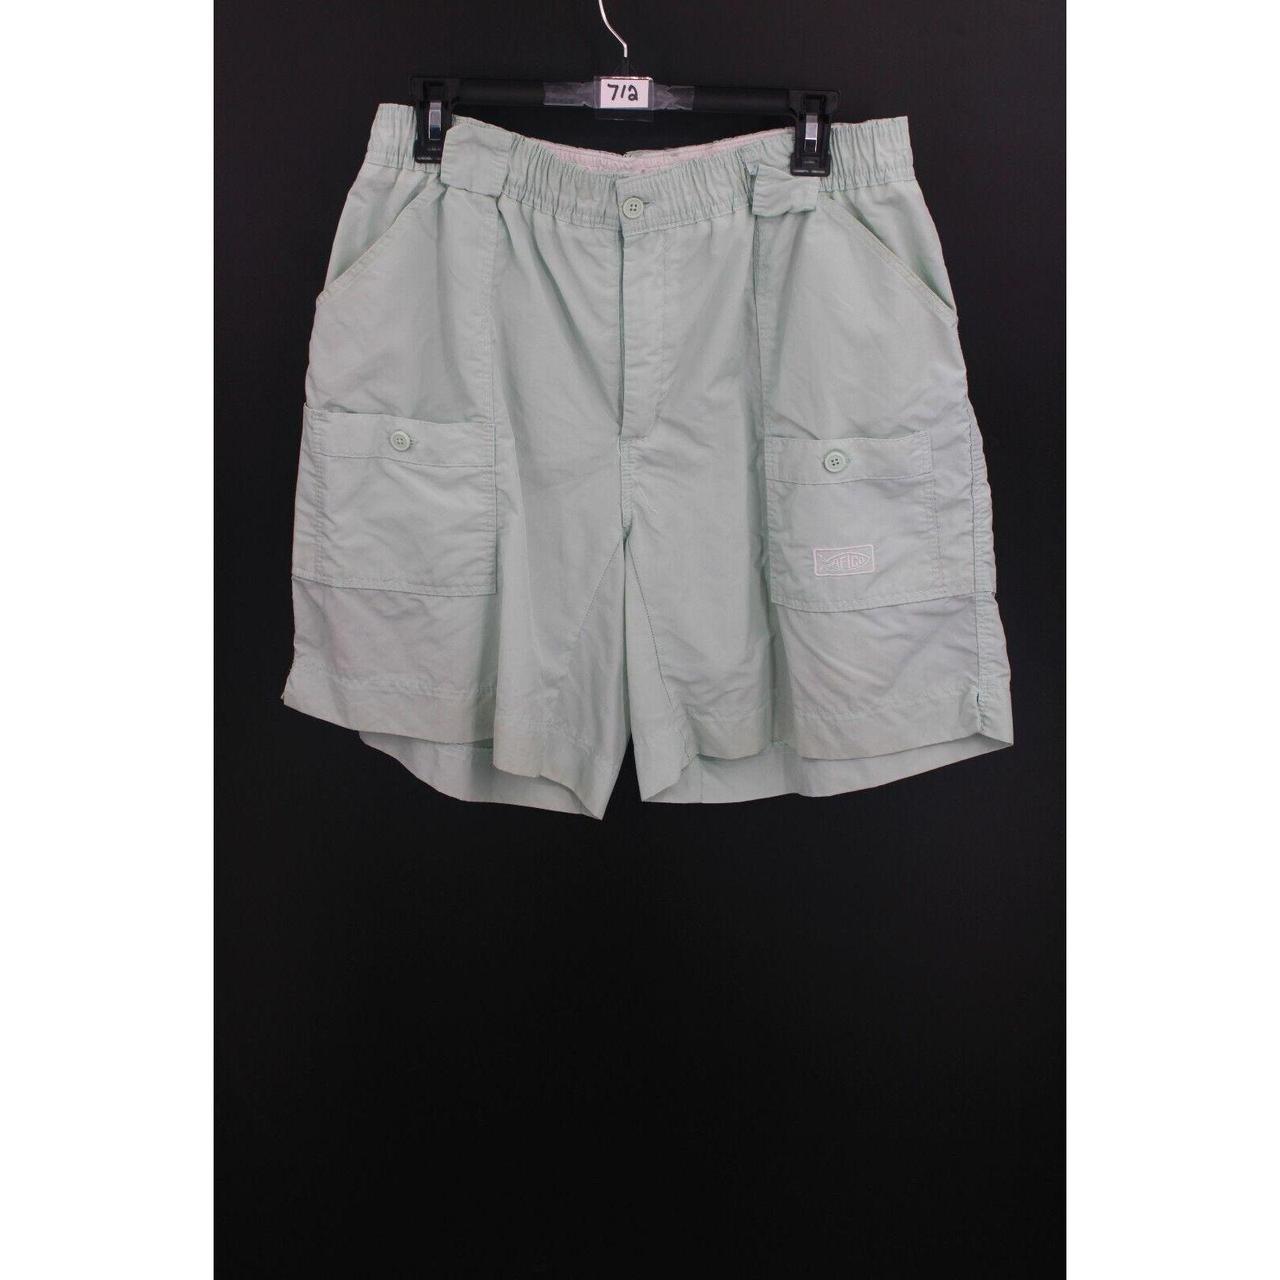 AFTCO MINT GREEN FISHING SHORTS MENS SIZE 36 GREAT - Depop